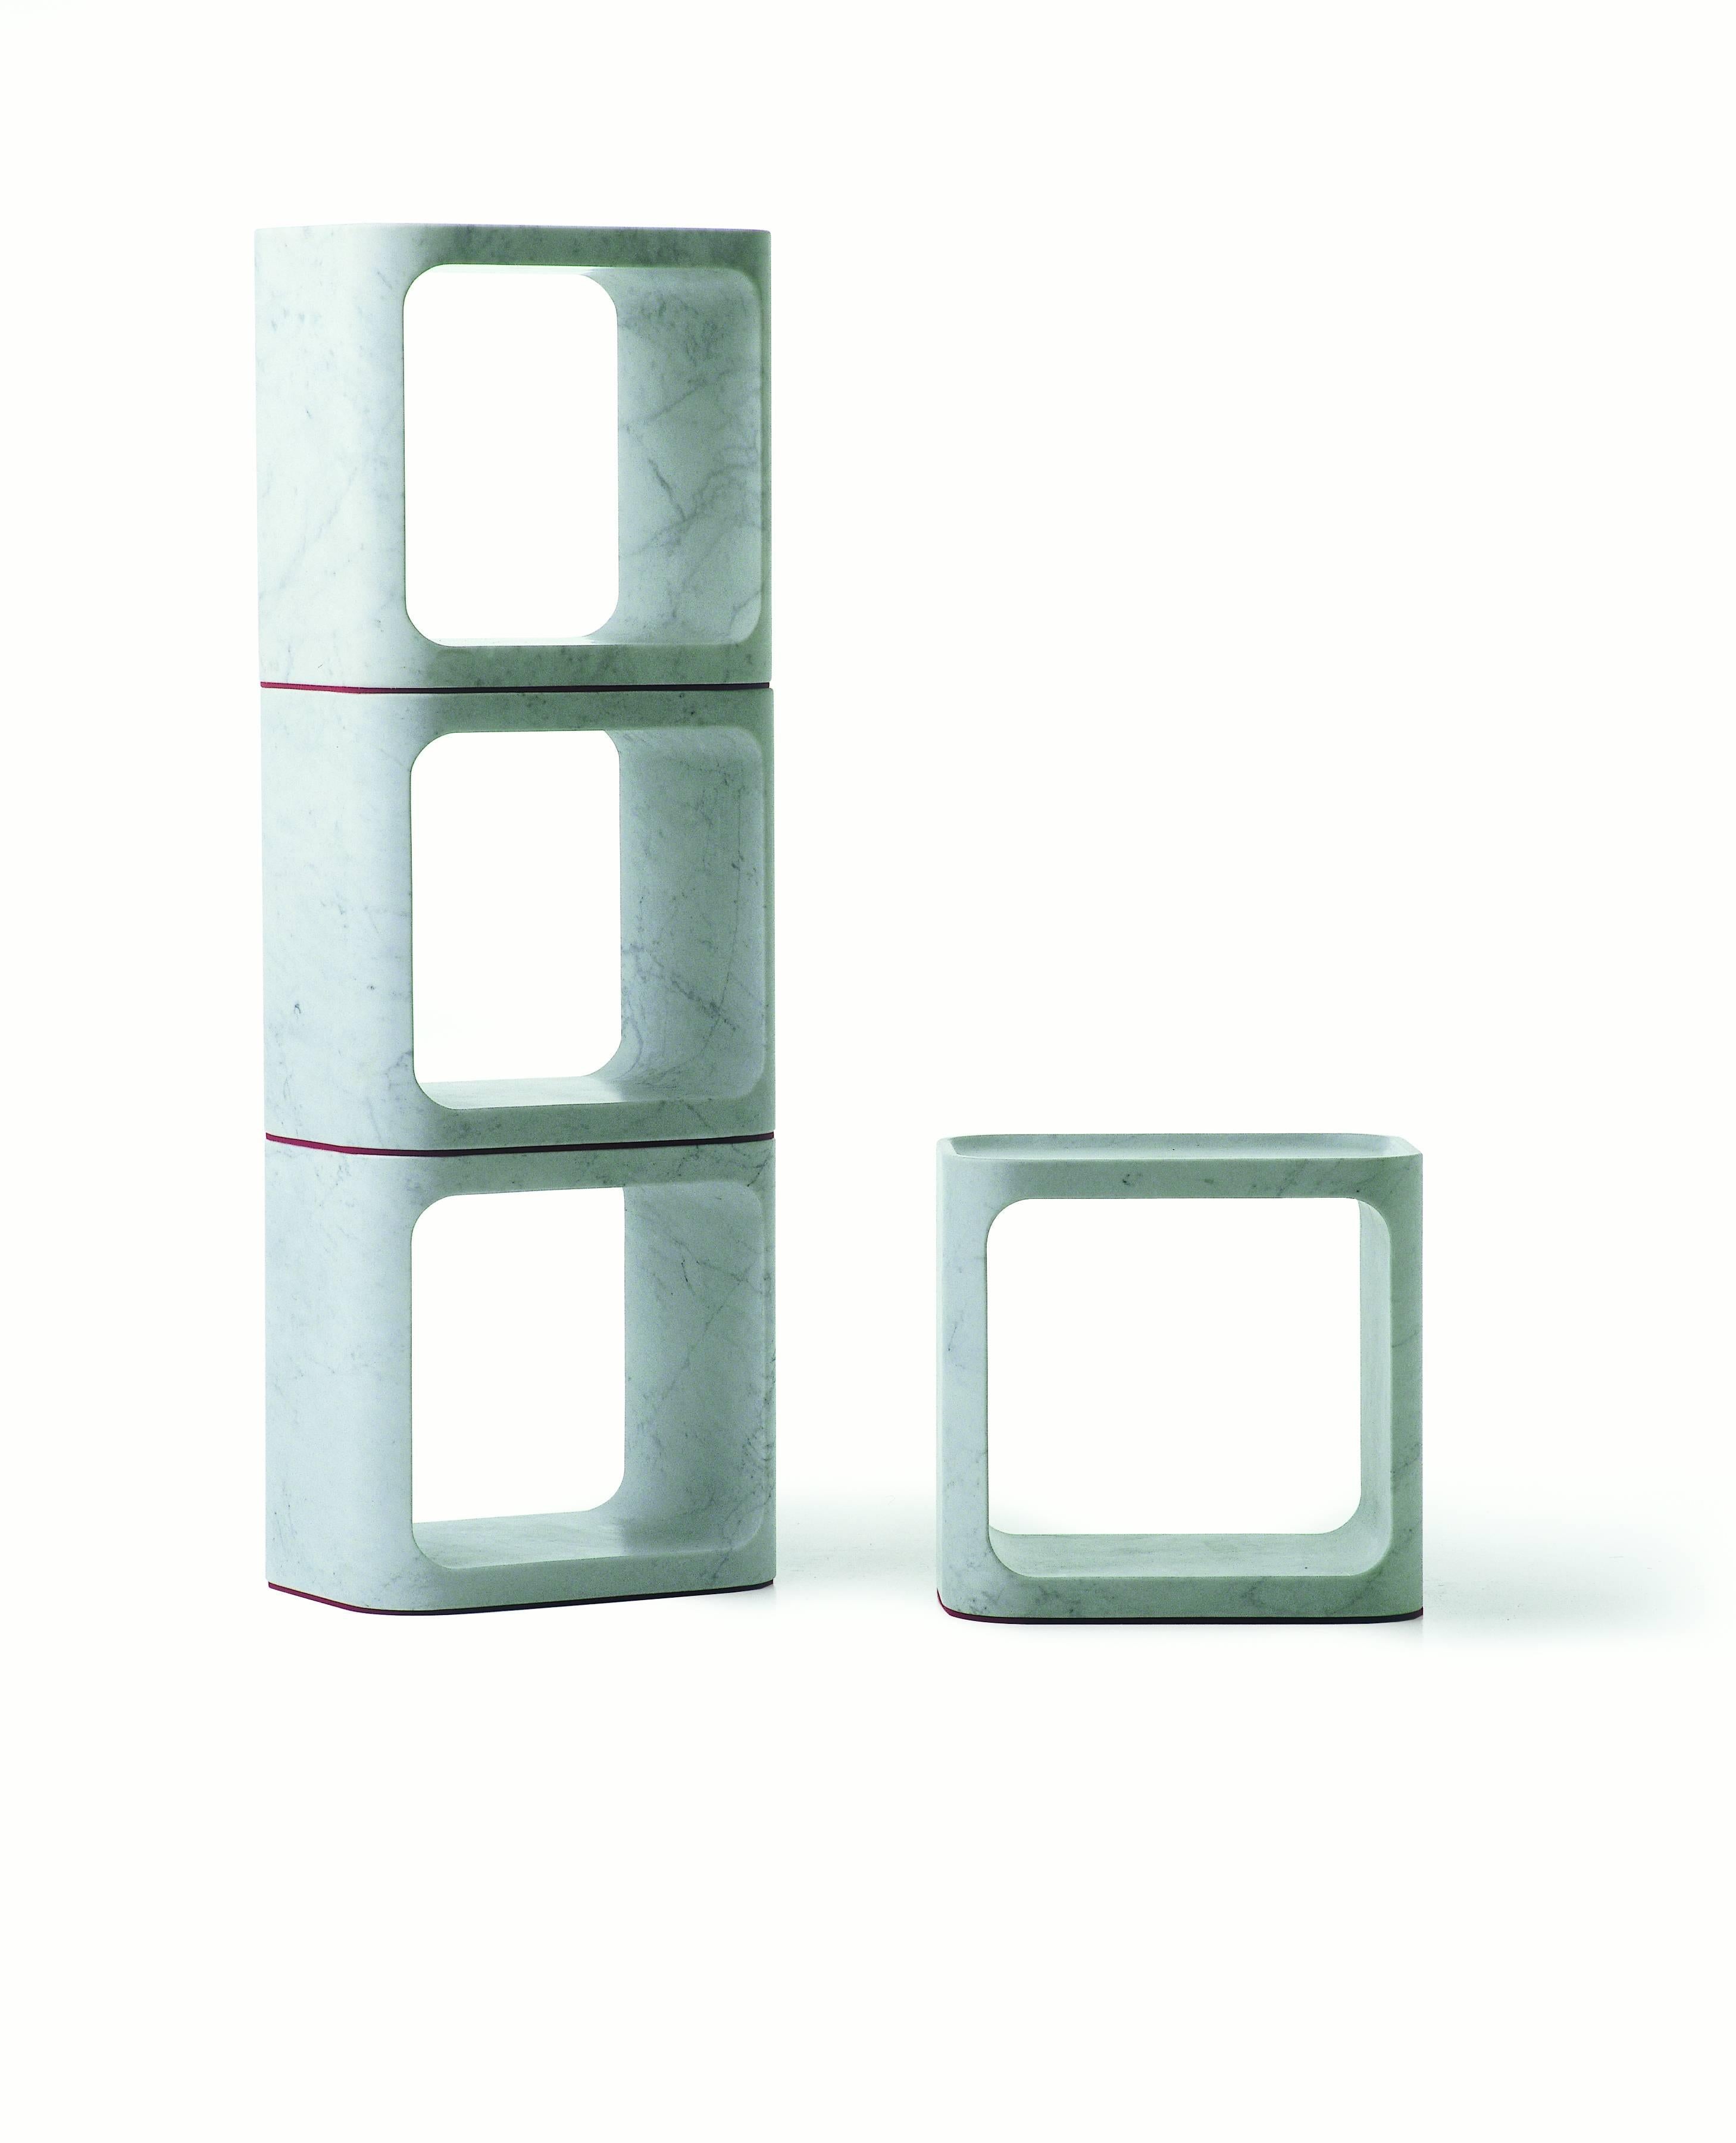 Plato is a stool, a sidetable and a stackable container. It’s an iconic piece designed by Jeff Miller who chose the most classical of materials to carve a modern plastic form. It is as much about the negative space, the material that is missing, and